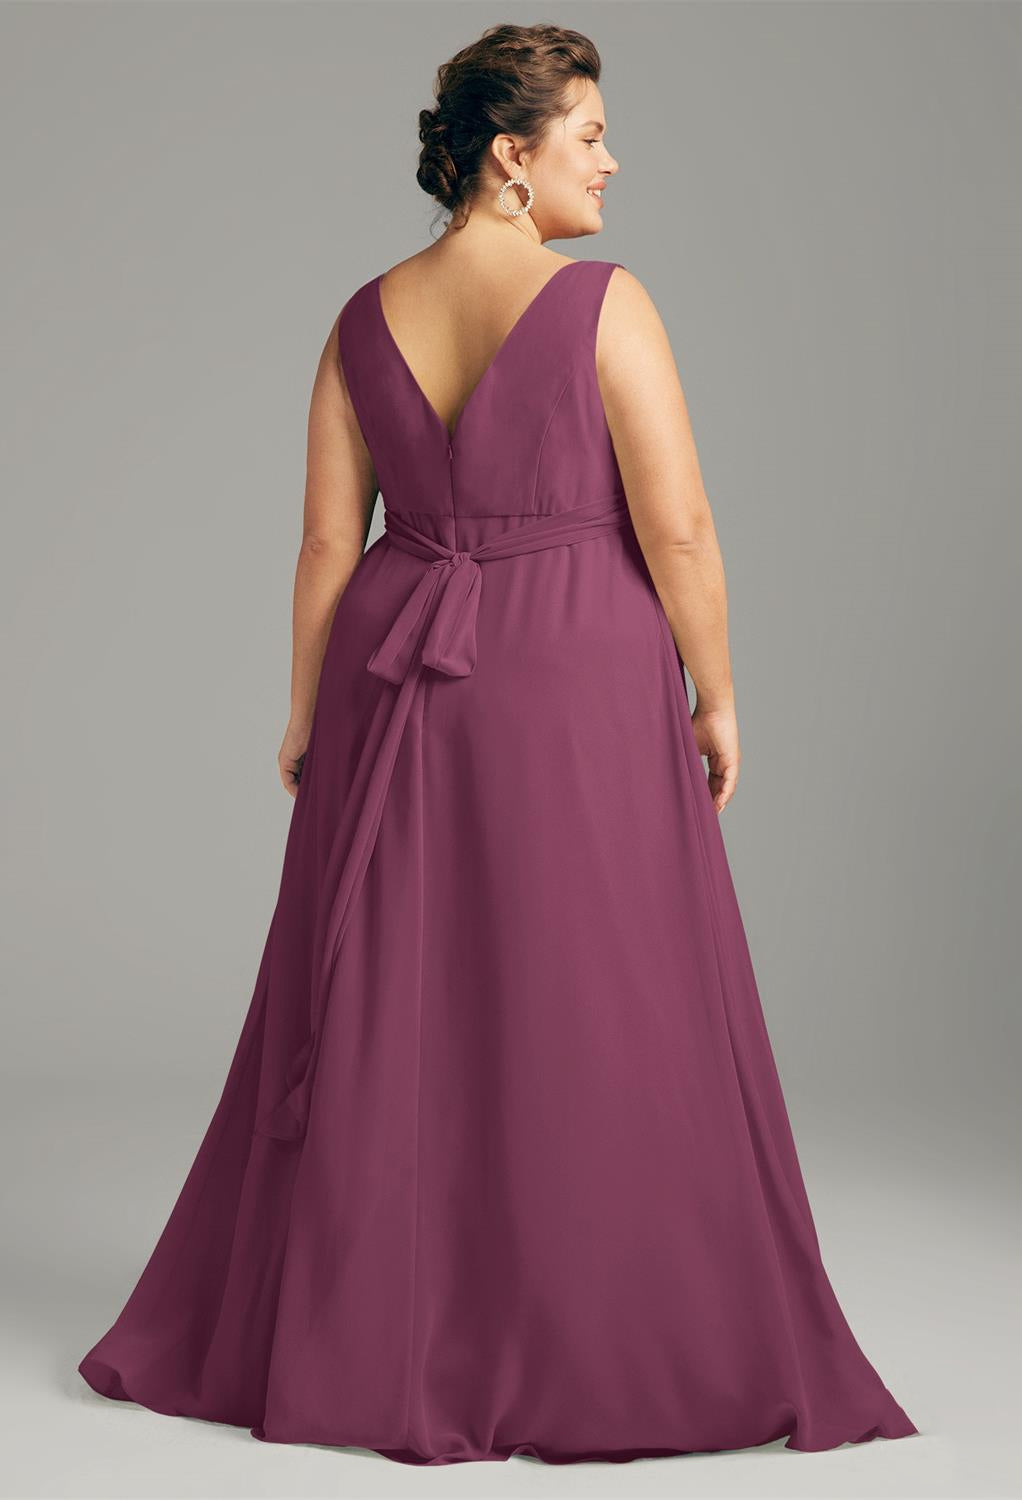 A Hilaria - Chiffon Bridesmaid Dress - Off the Rack in purple available at bridal shops in London by Bergamot Bridal.